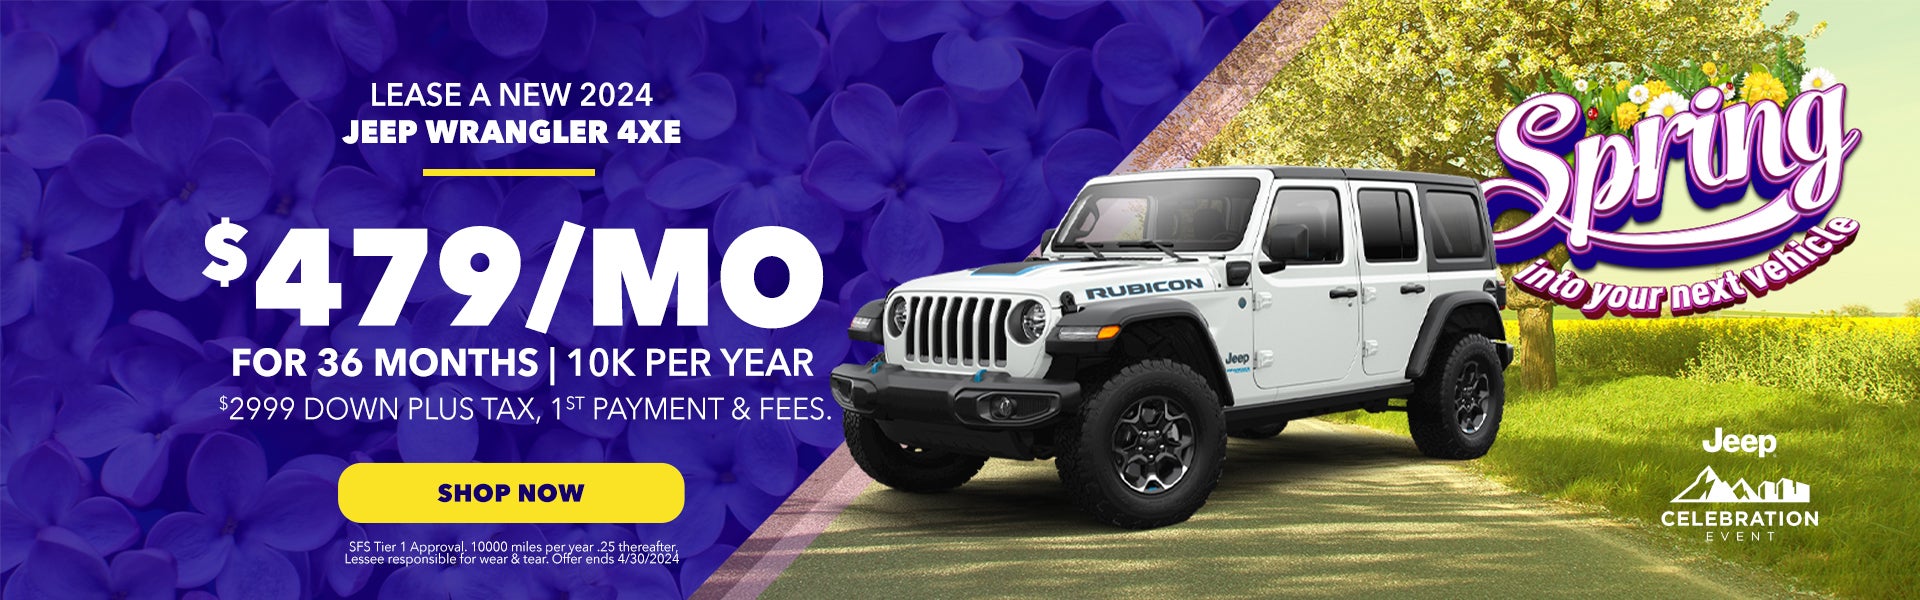 Lease a new 2024 Jeep Wrangler